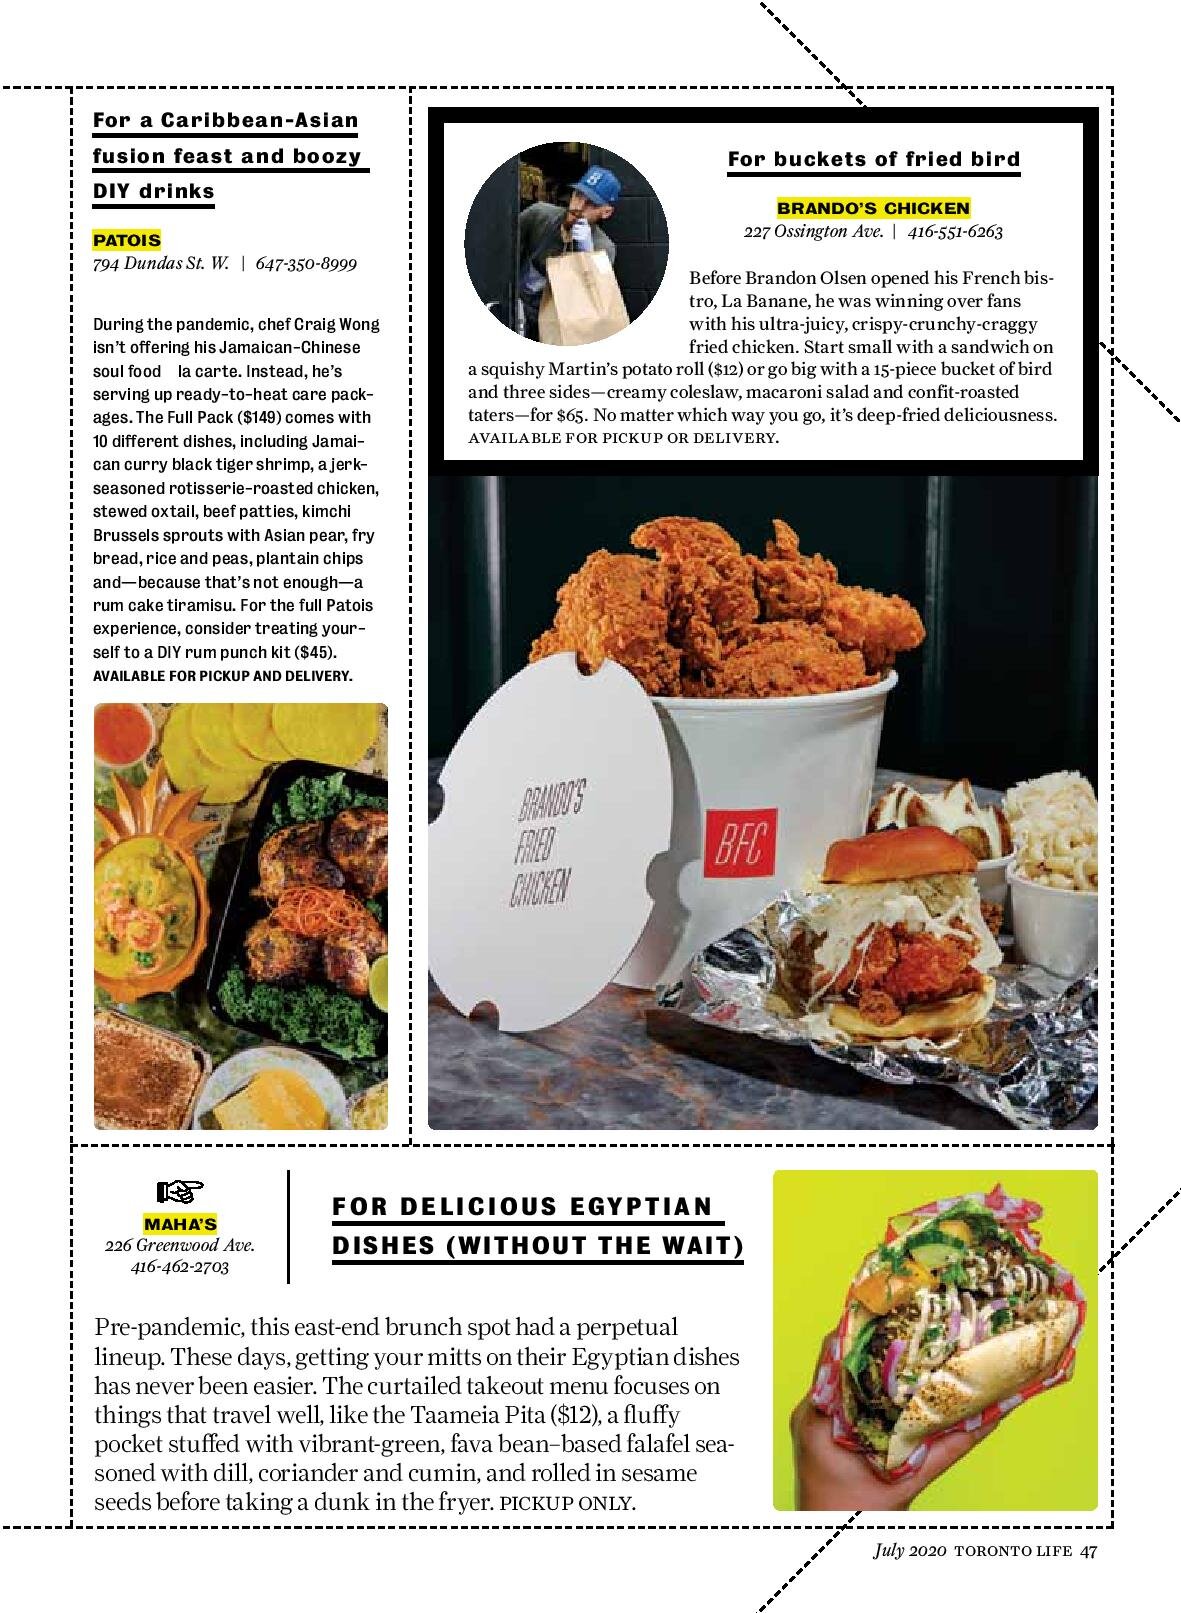 TAKEOUT-2-page-010.jpg